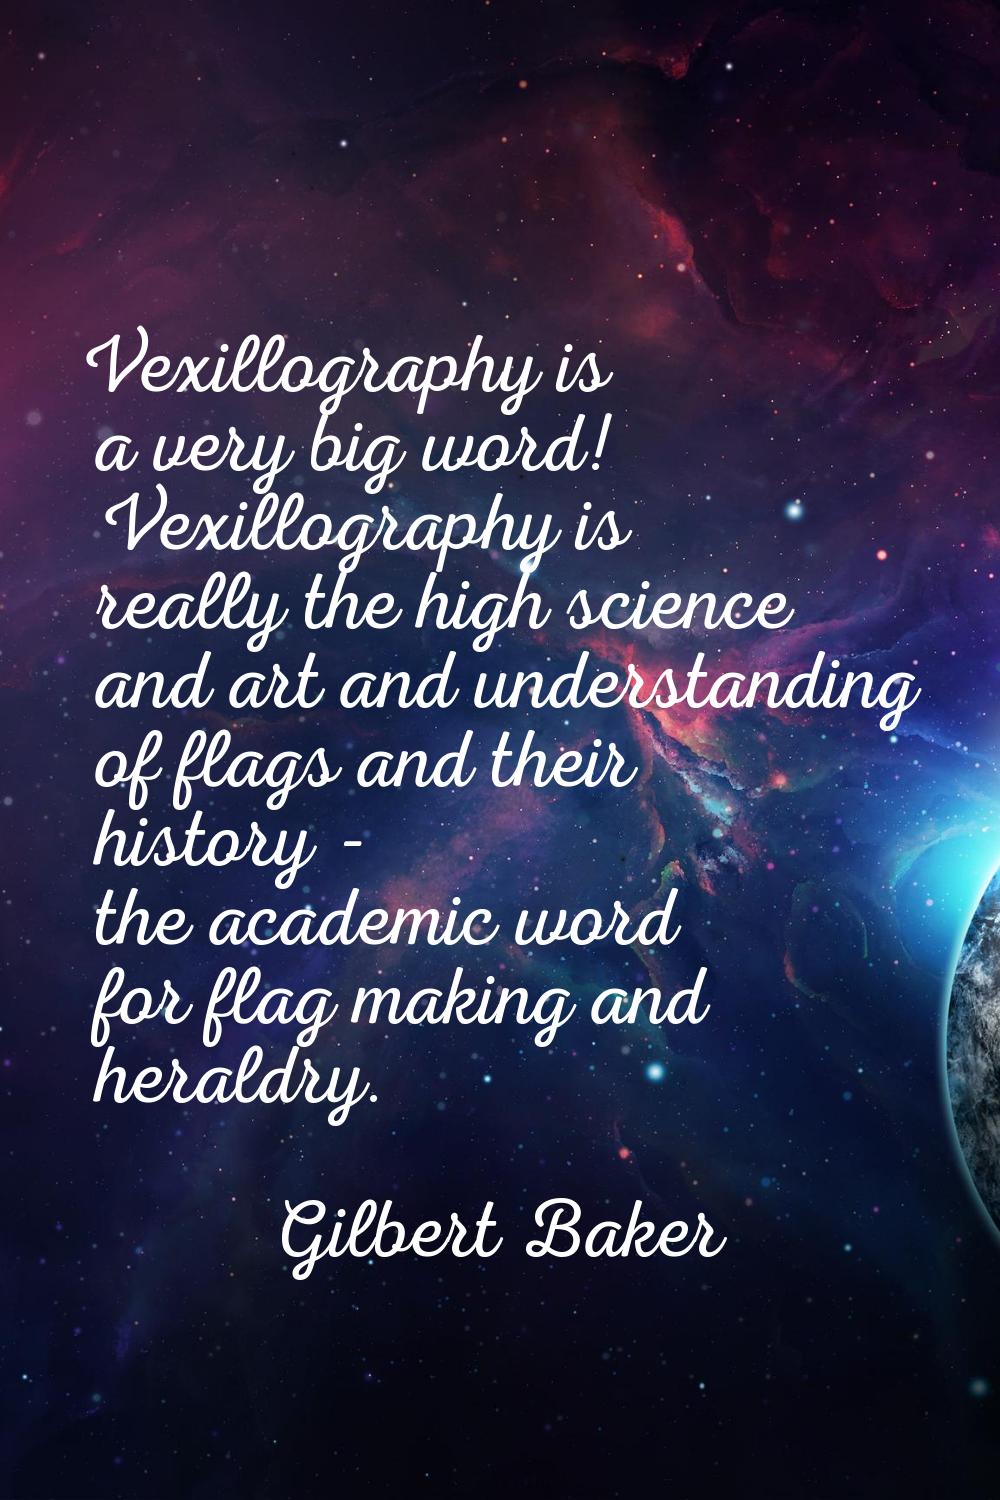 Vexillography is a very big word! Vexillography is really the high science and art and understandin